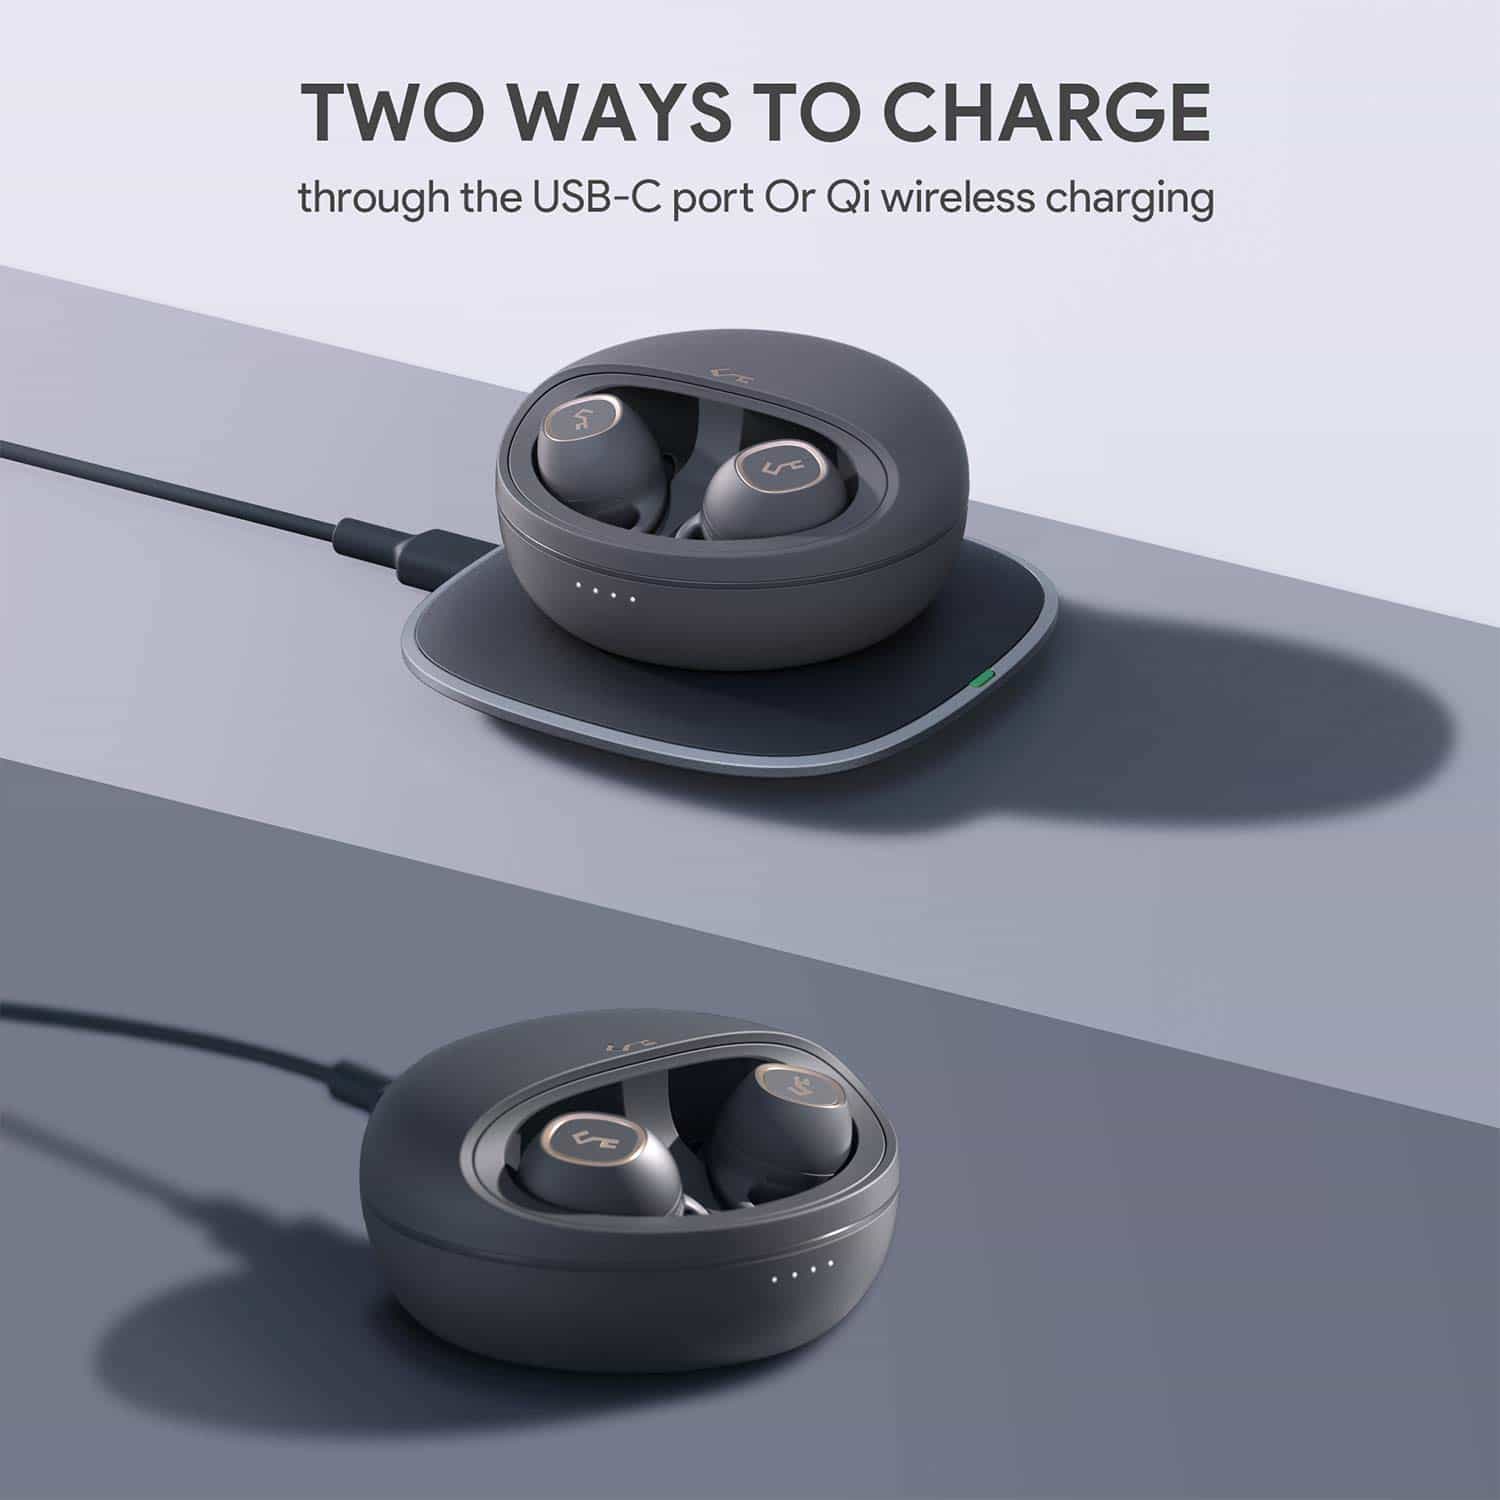 EP-T10 Key Series IPX5 BT 5.0 TWS True Wireless Earphone with Touch Control & Qi Wireless Charging